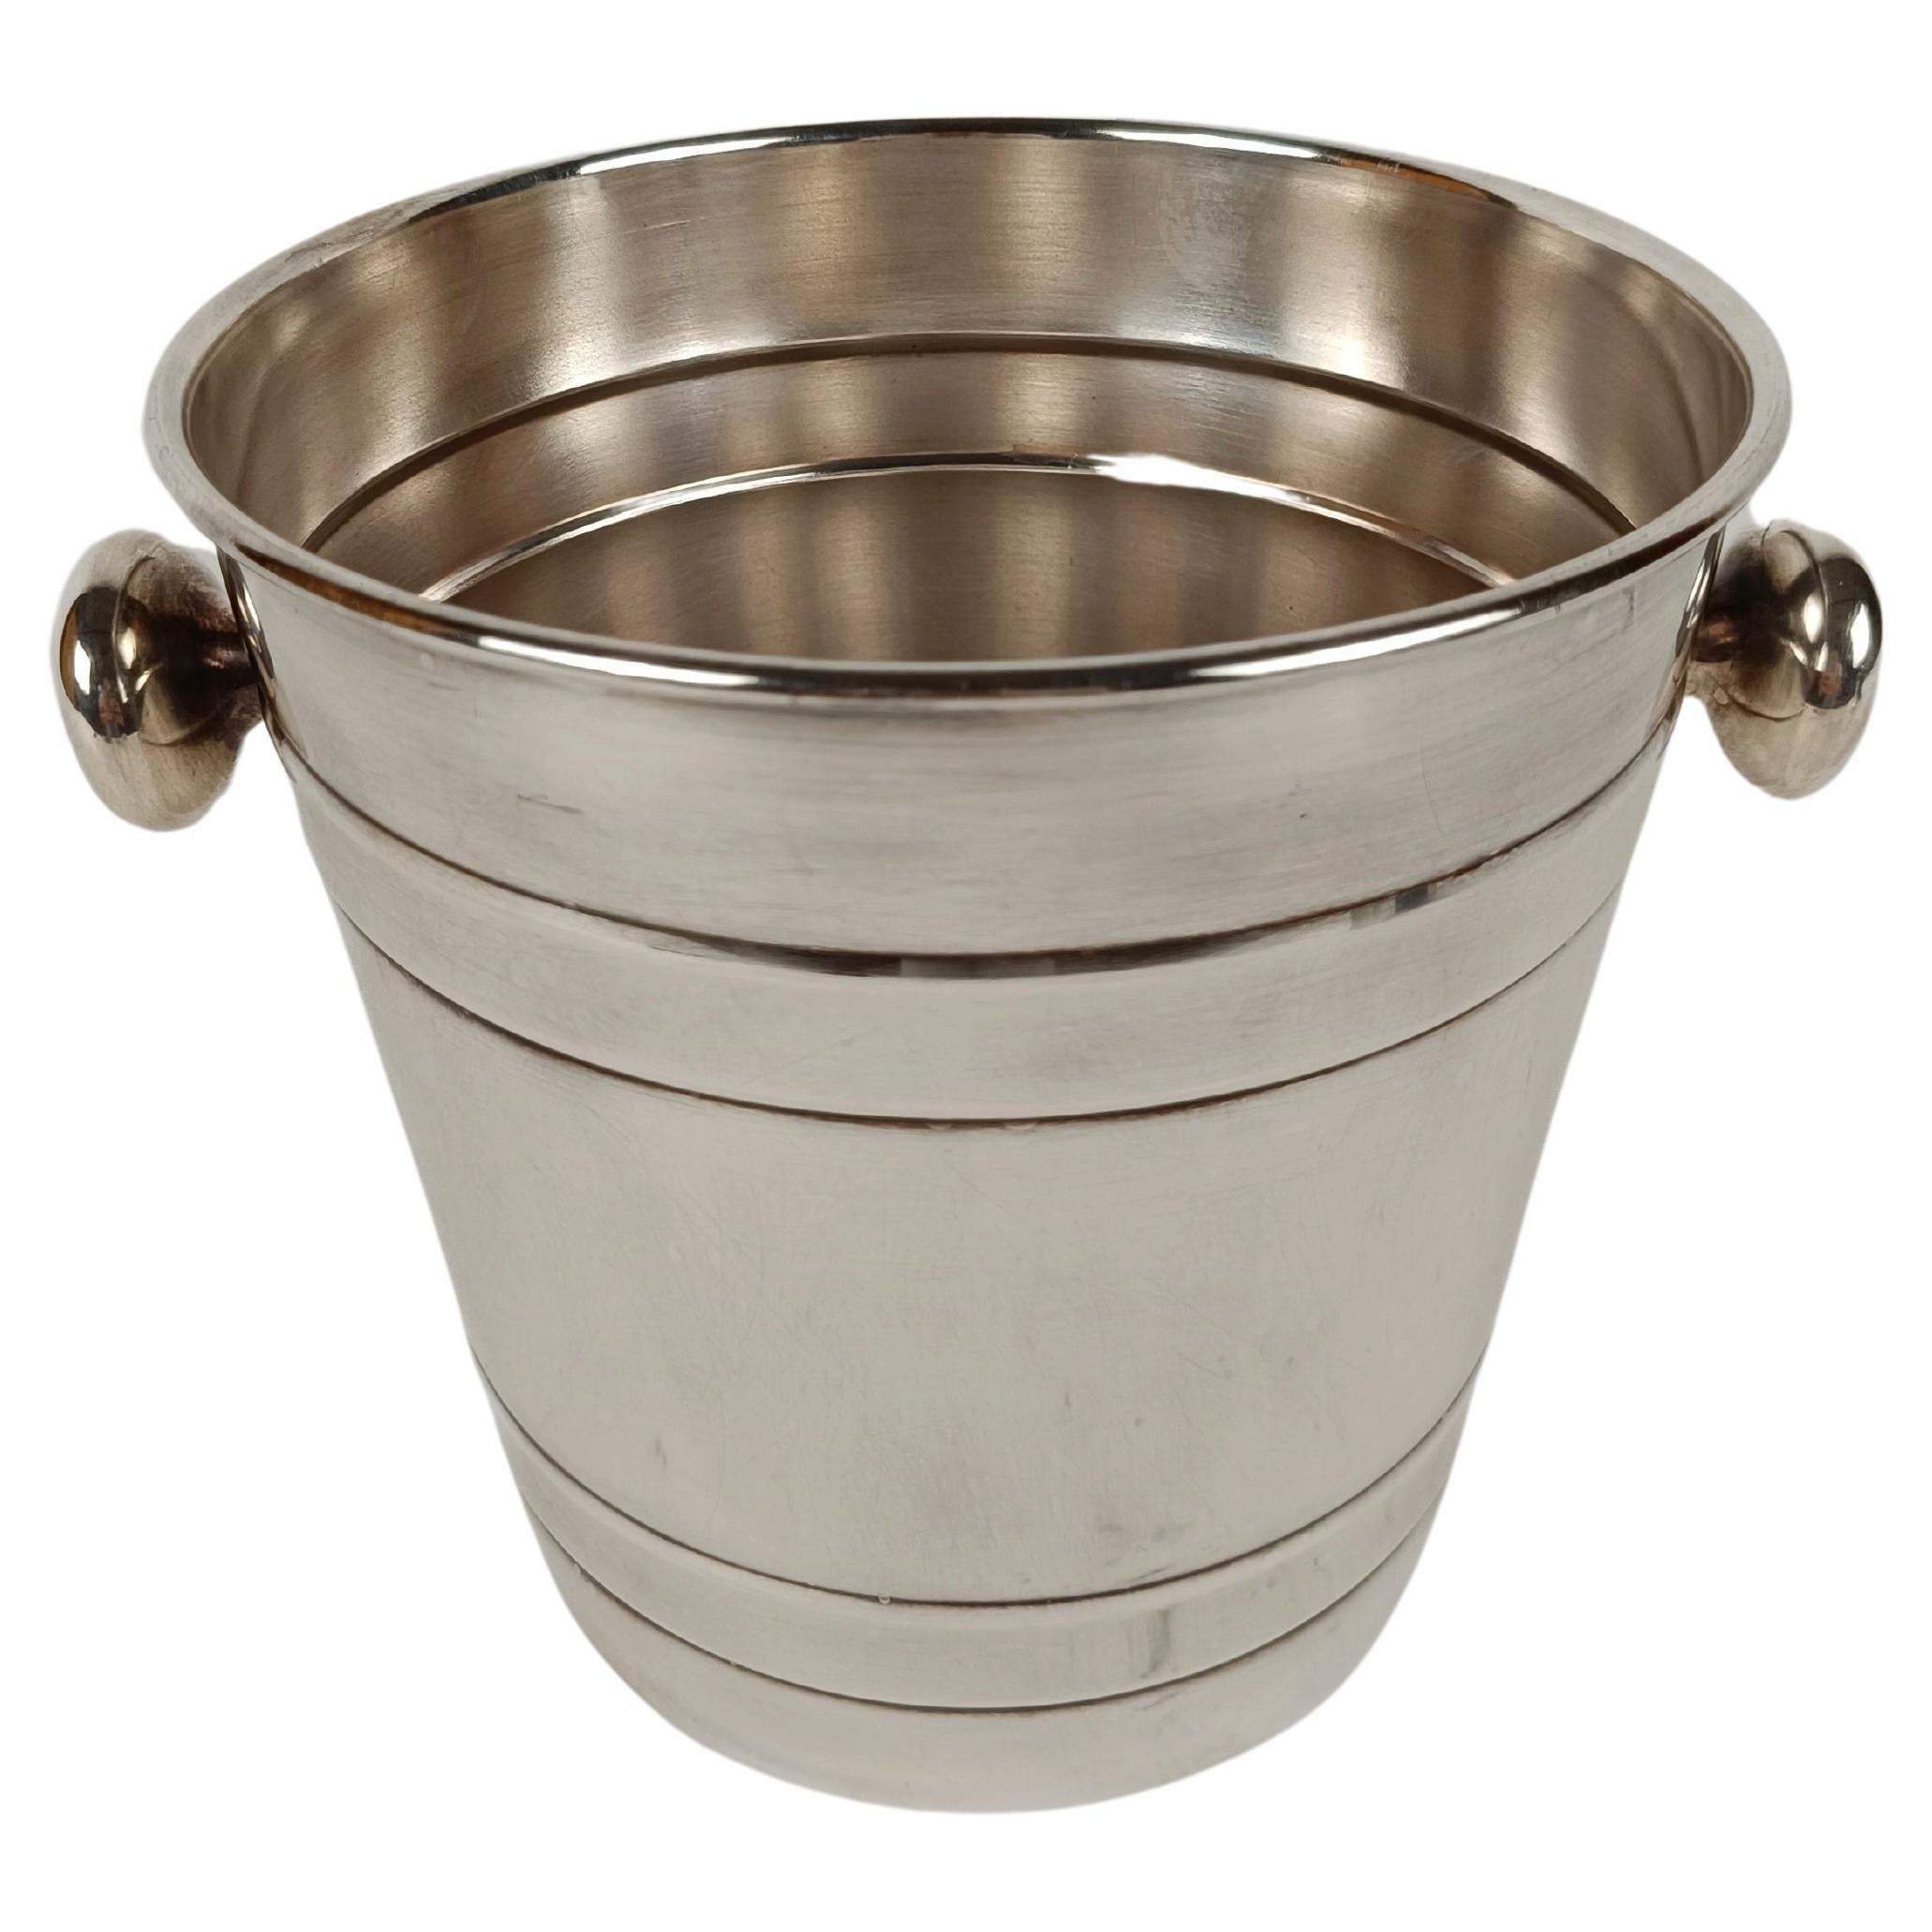 Vintage Champagne bucket with knobs made in Stainless Steell by Broggi Italy 